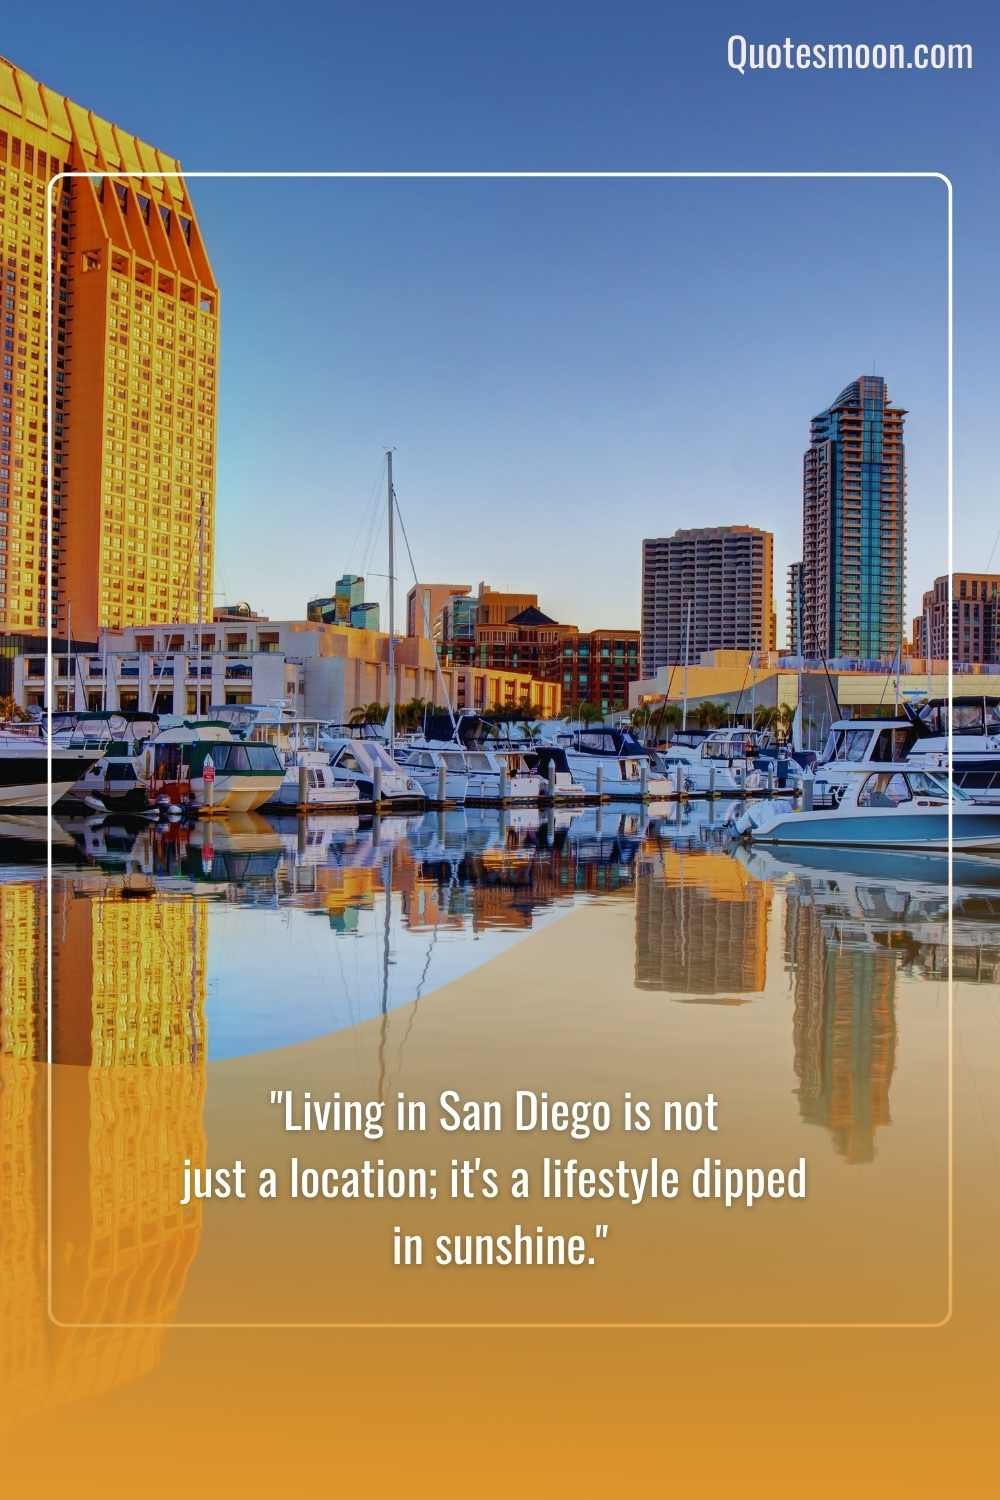 Meaningful San Diego Quotes with images New